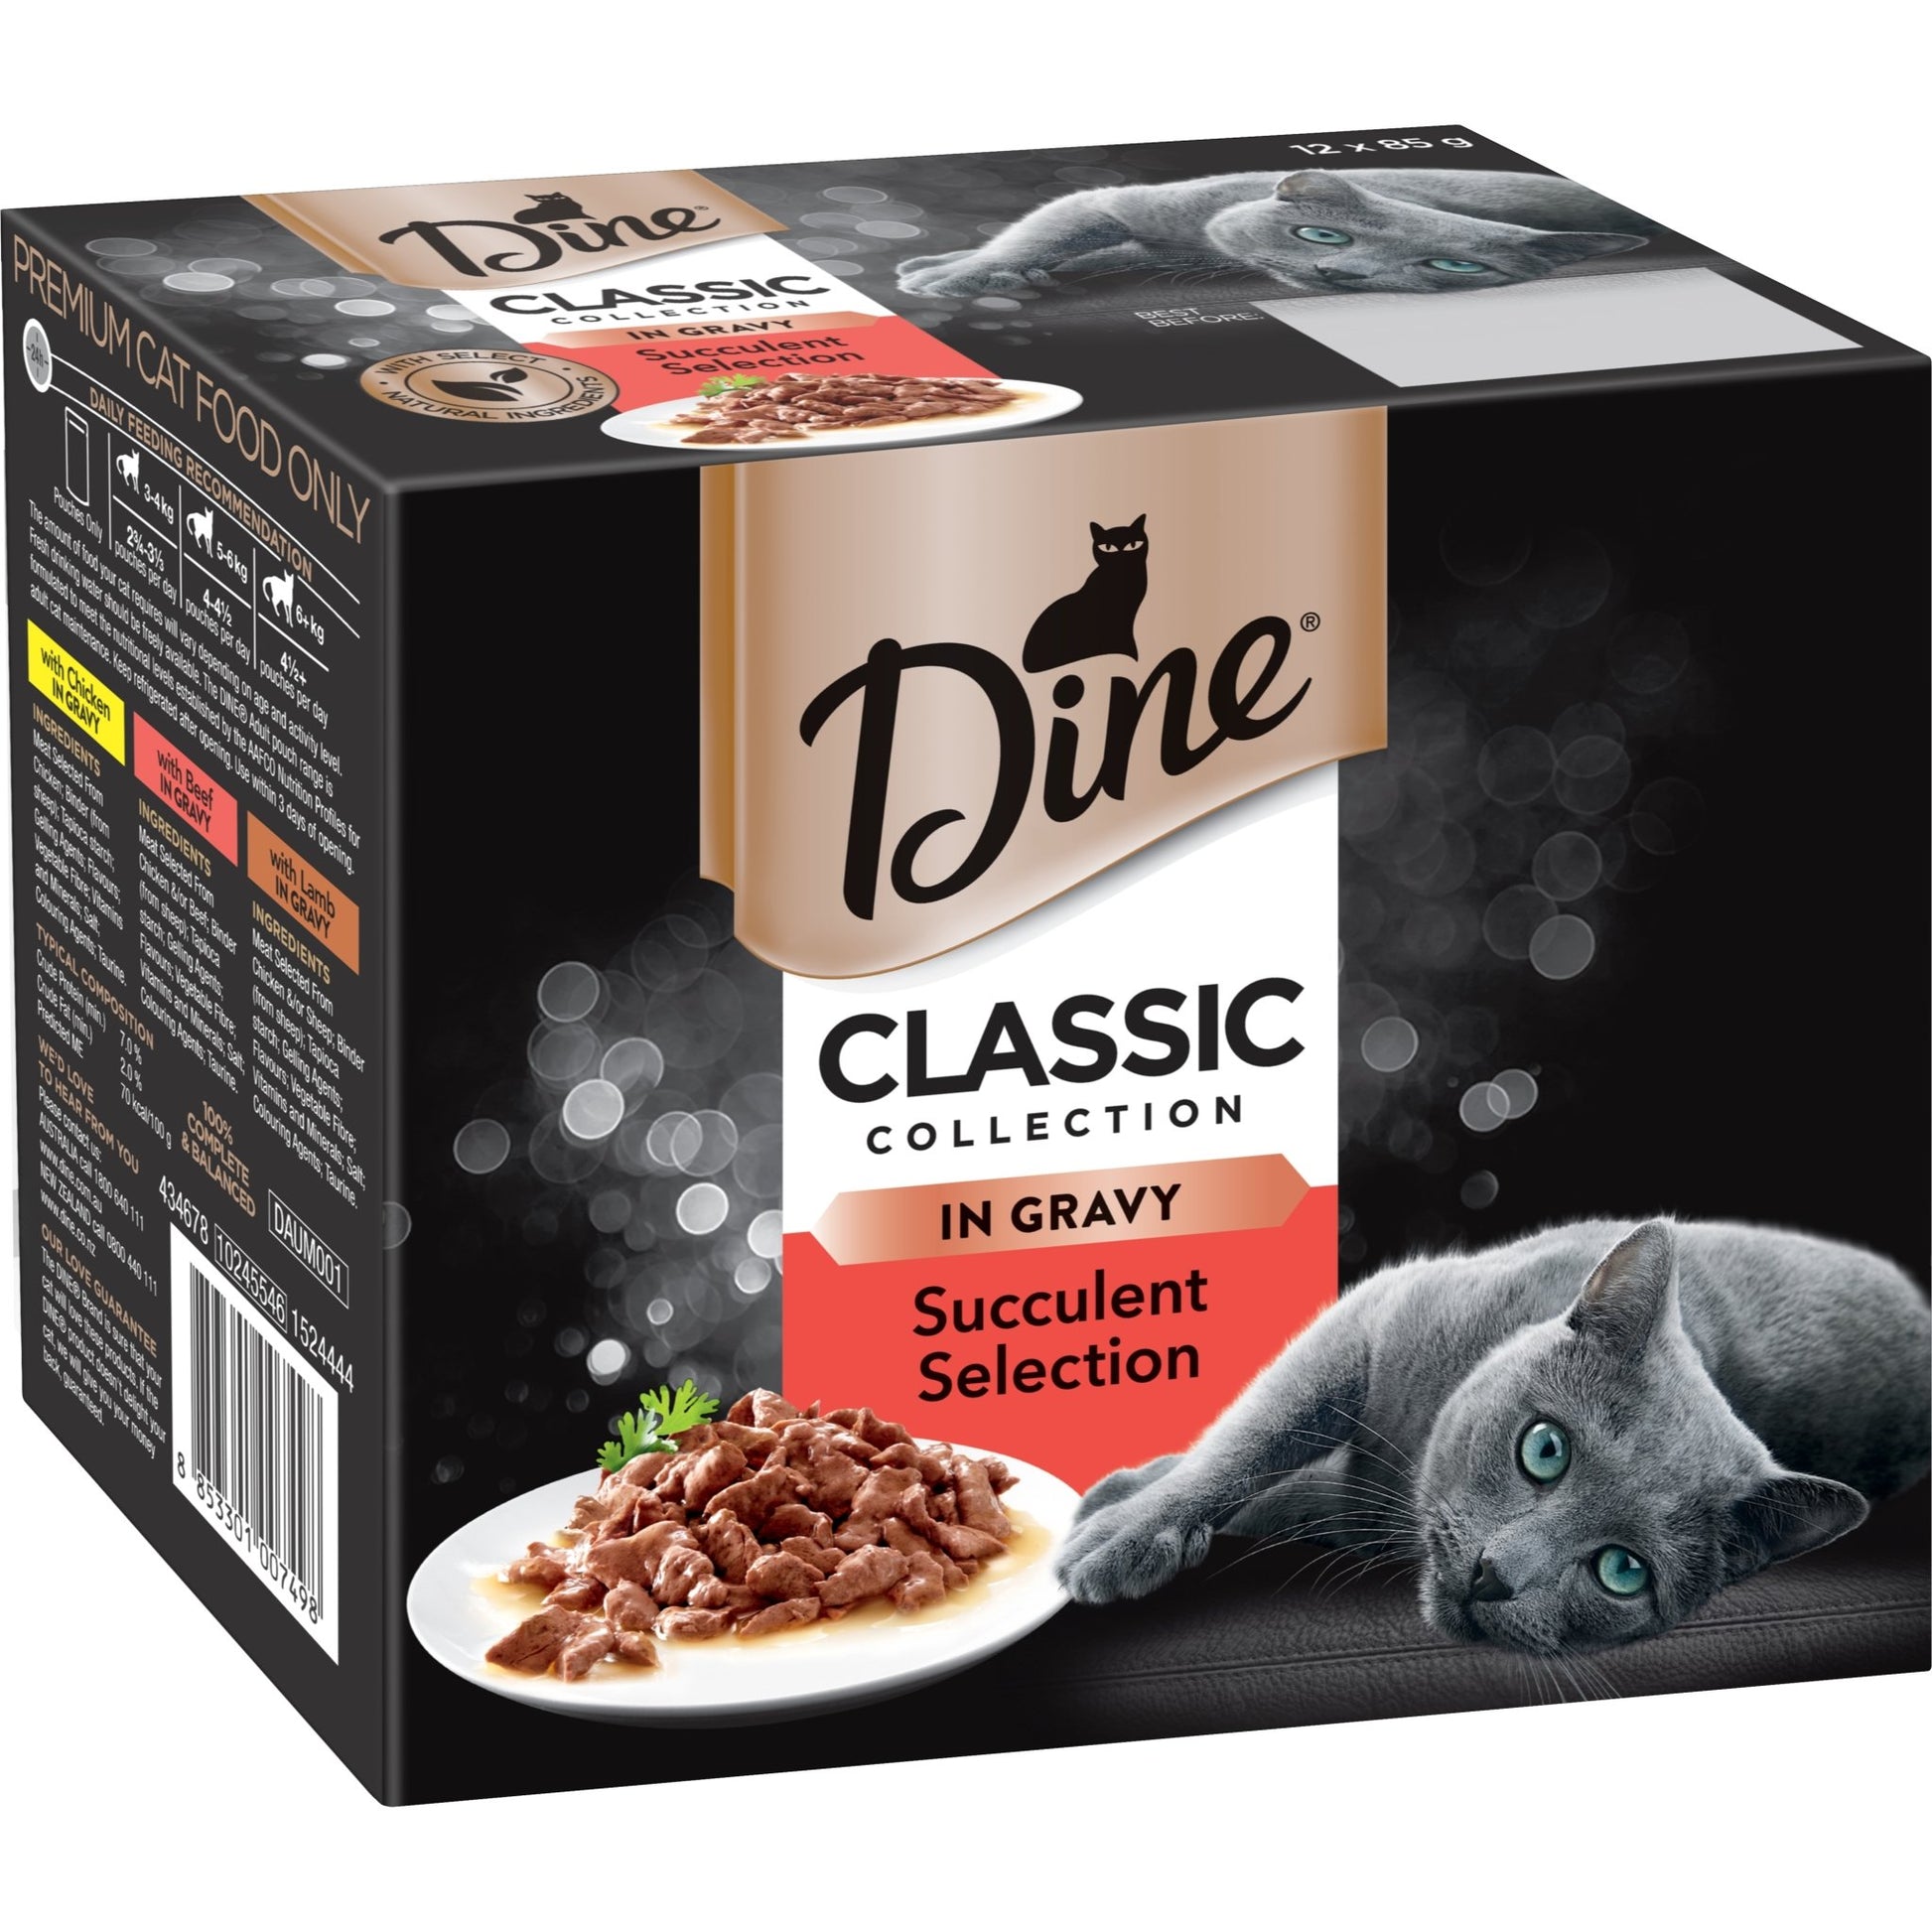 Dine Classic Collection in Gravy Succulent Selection12x85g - Woonona Petfood & Produce